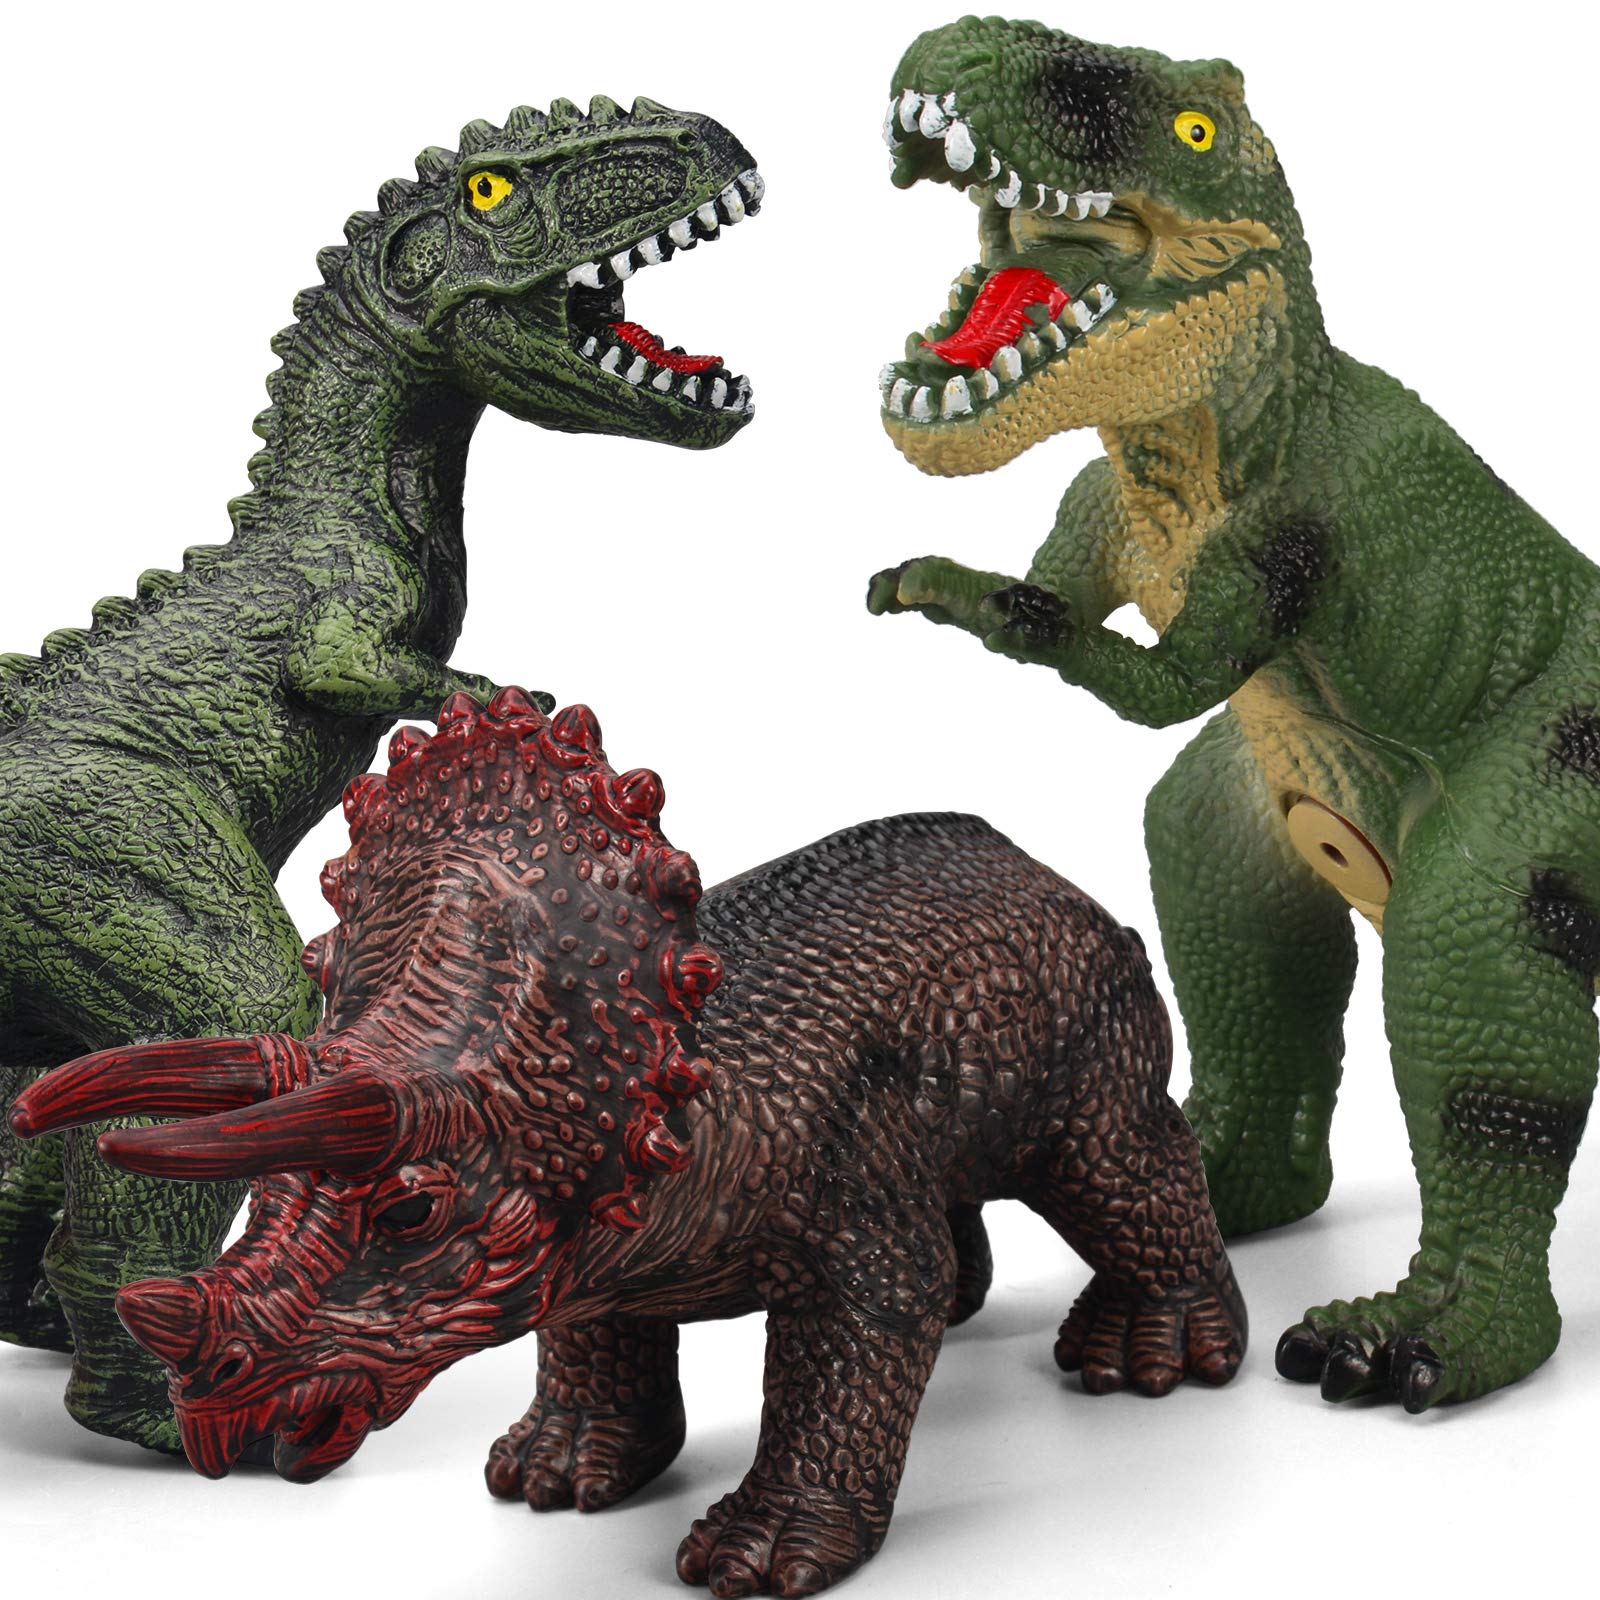 Gzsbaby 6 Piece Jumbo Dinosaur Toys for Kids and Toddlers, 13-17 Inches Blue Velociraptor T-Rex, Large Soft Dinosaur Toys Set for Dinosaur Lovers - Perfect Dinosaur Party Favors, Birthday Gifts